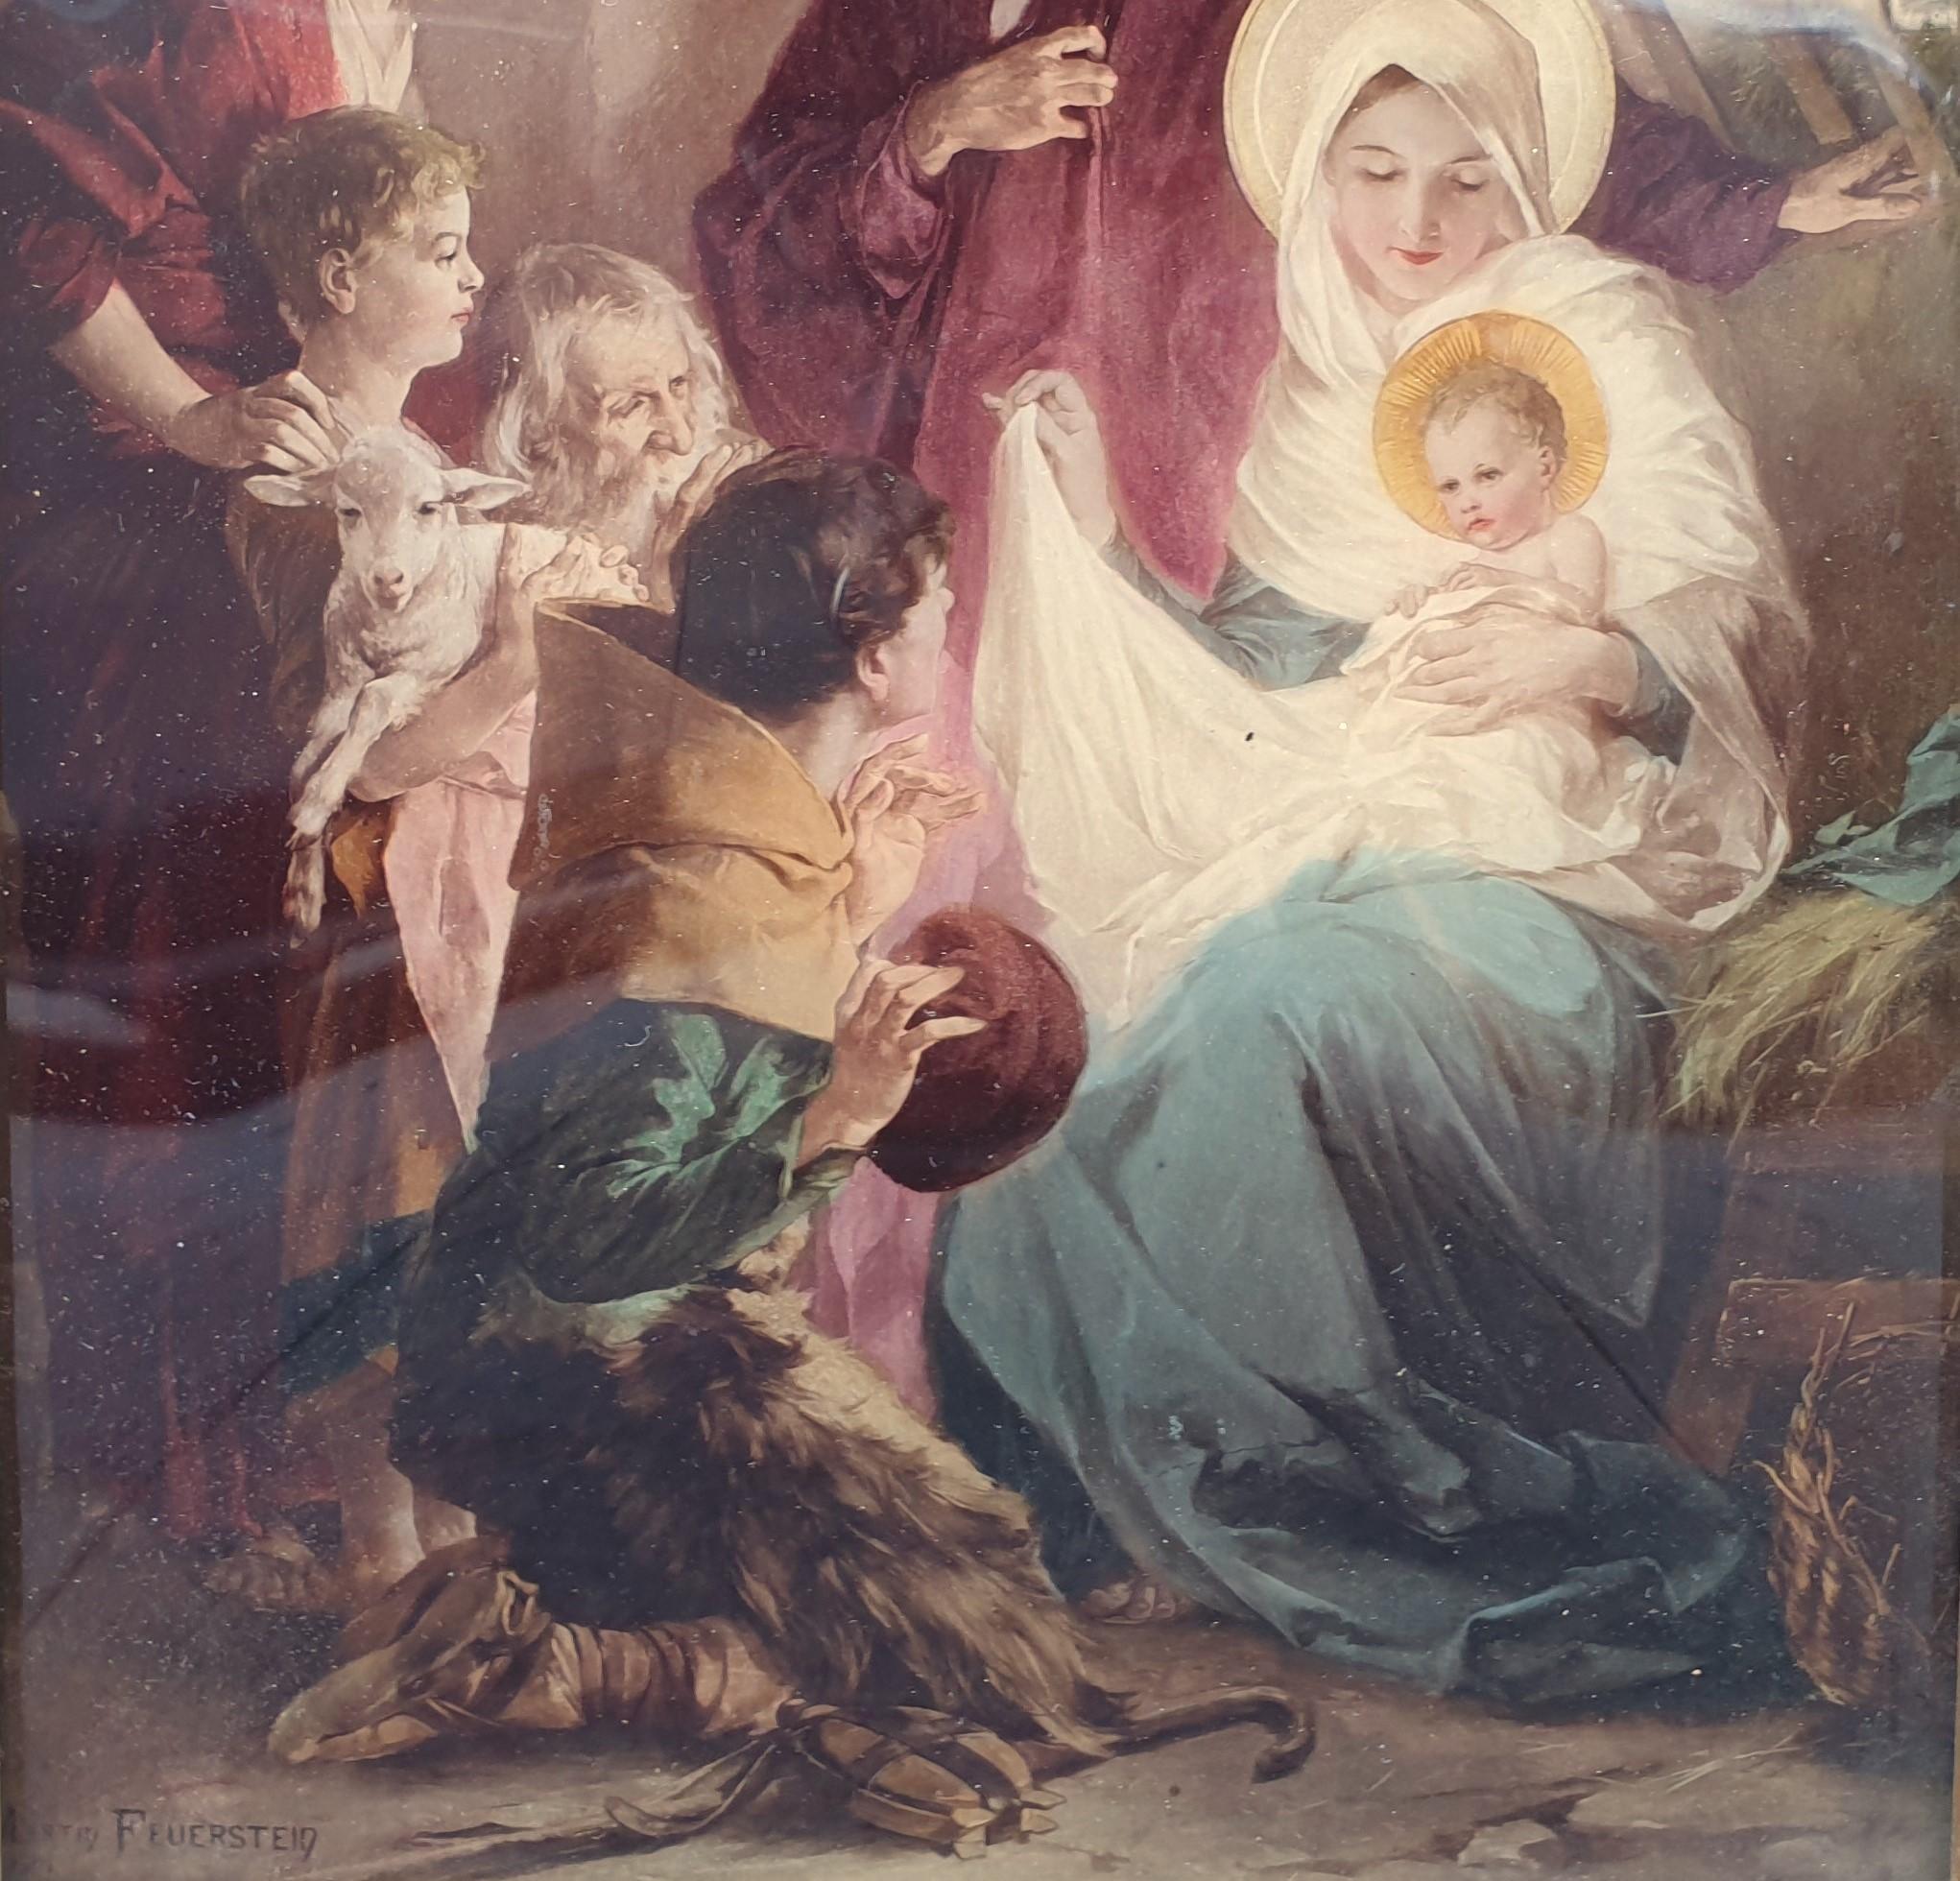 Martin FEUSERSTEIN (after) - Adoration of the sheperds - Academic Painting by Martin FEUERSTEIN